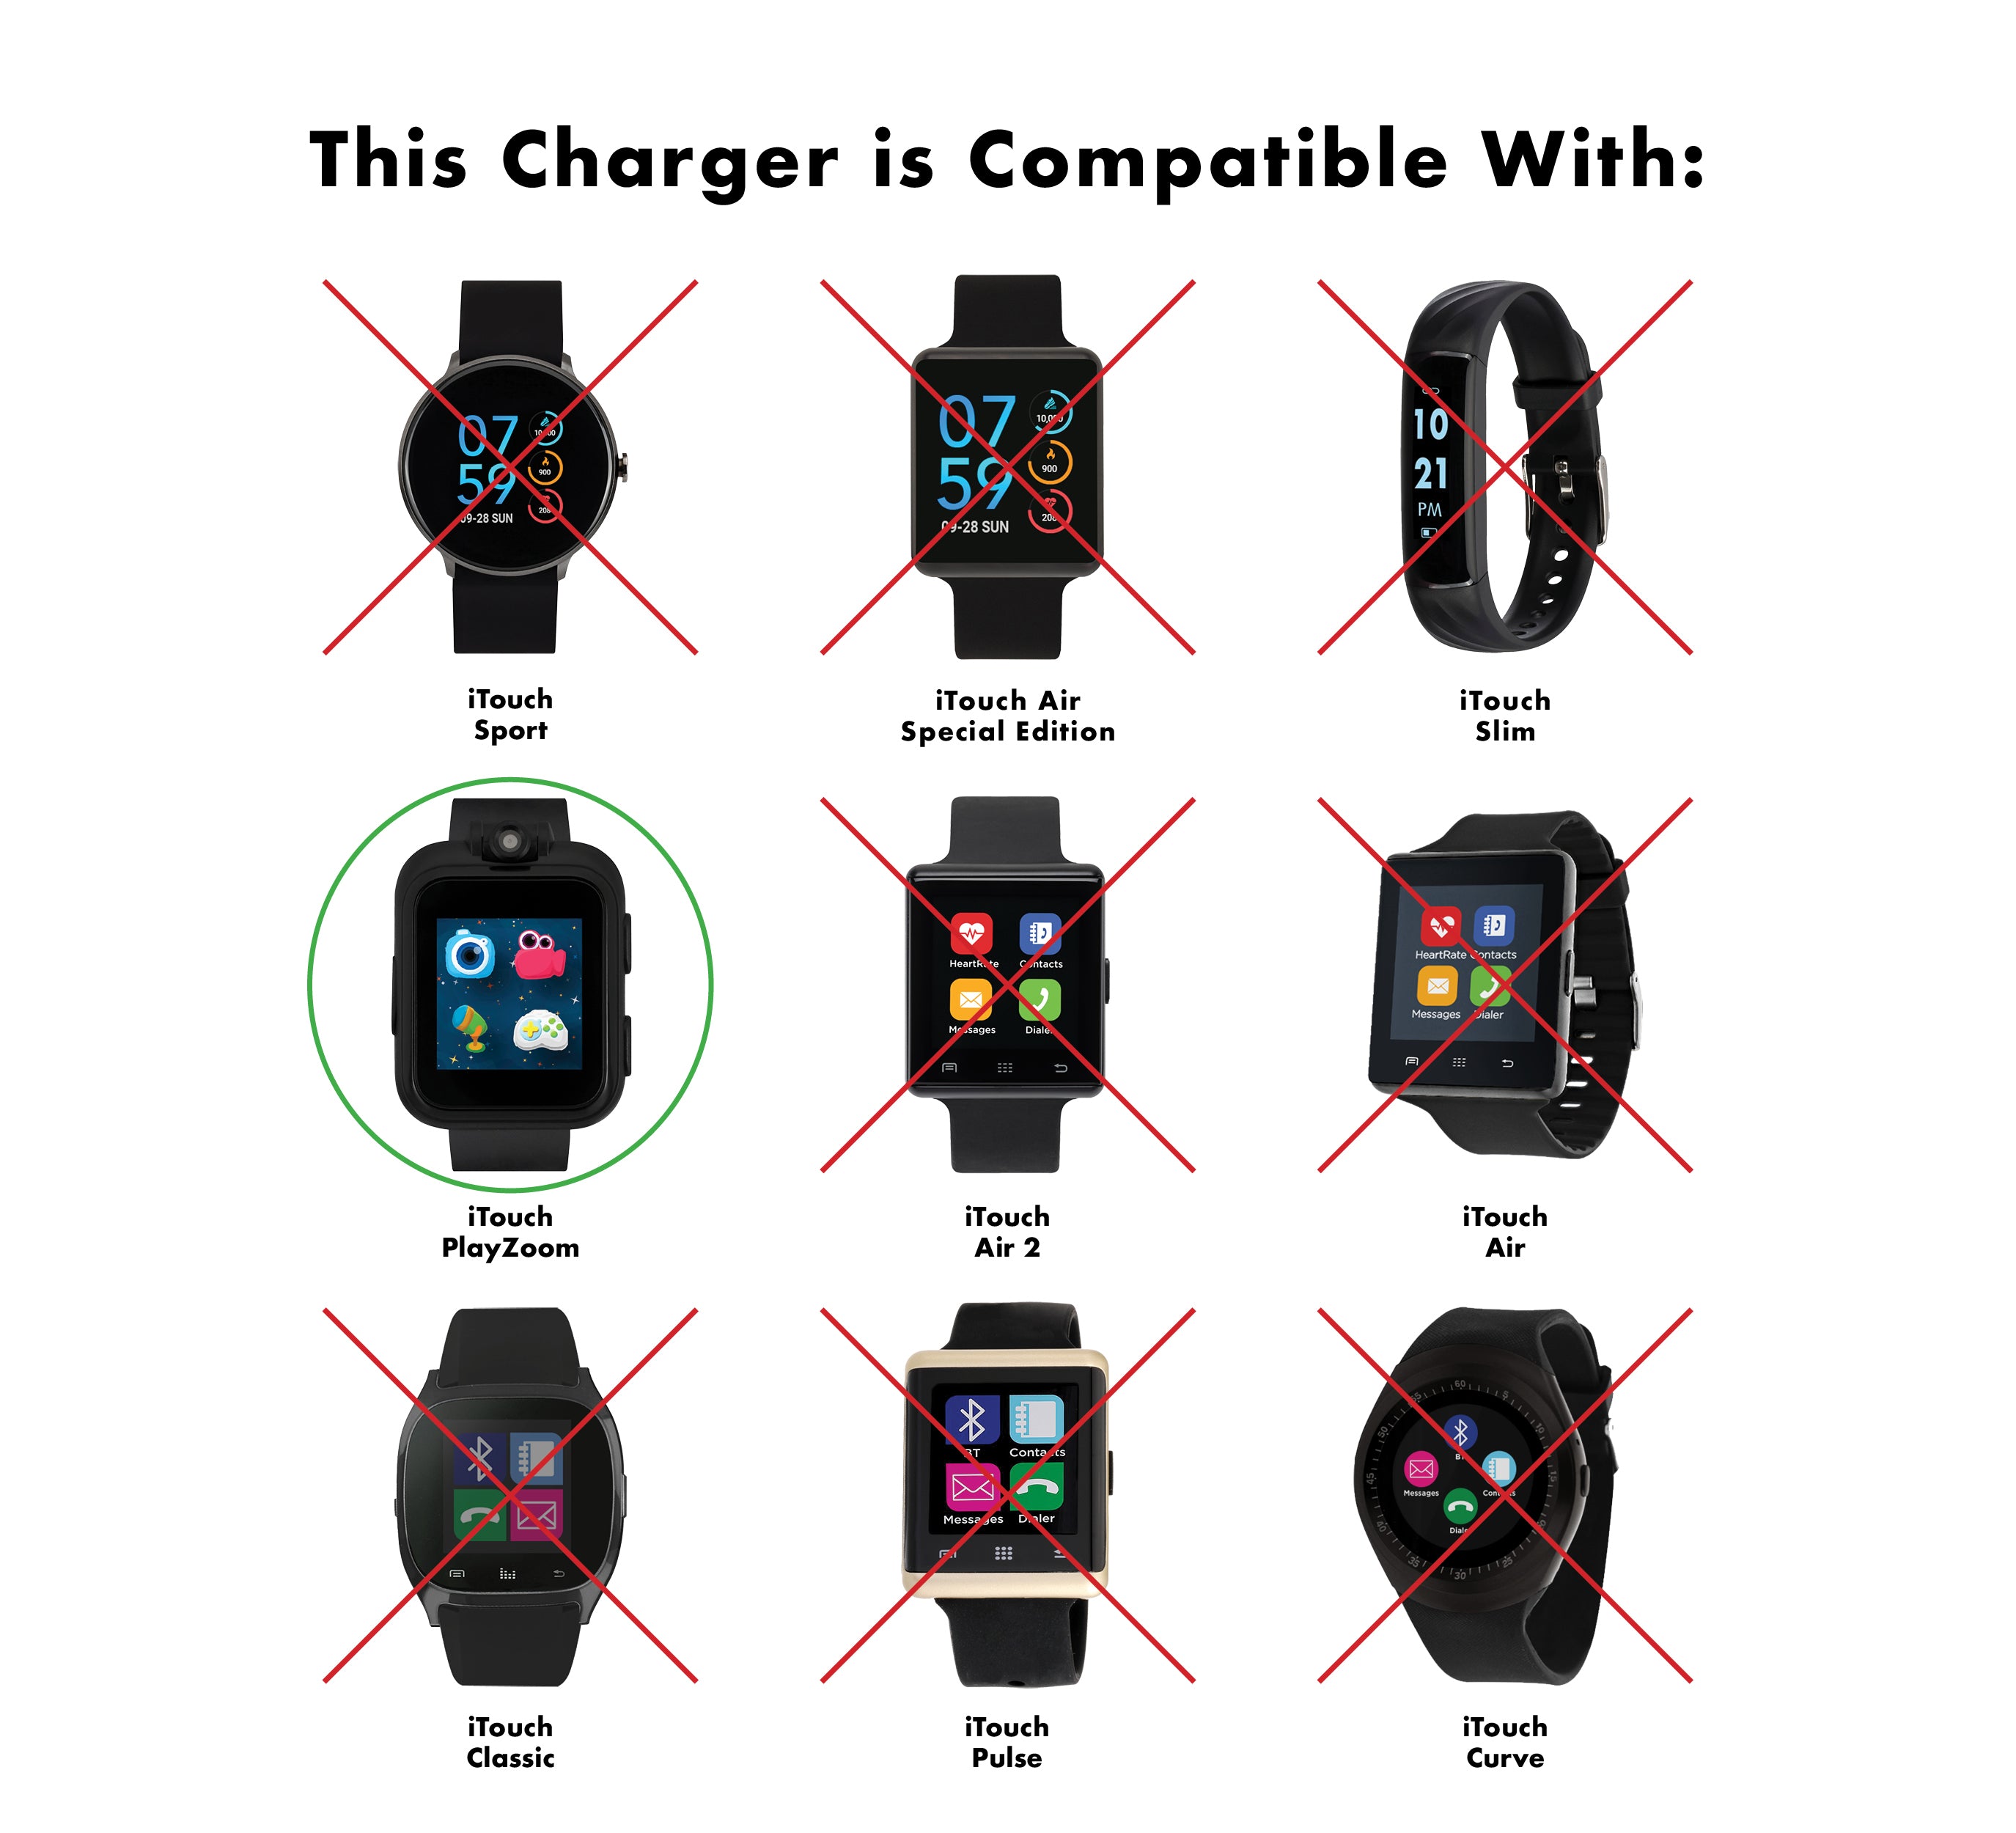 iTouch PlayZoom Smartwatch Charging Cable: Blue, 1ft affordable charger